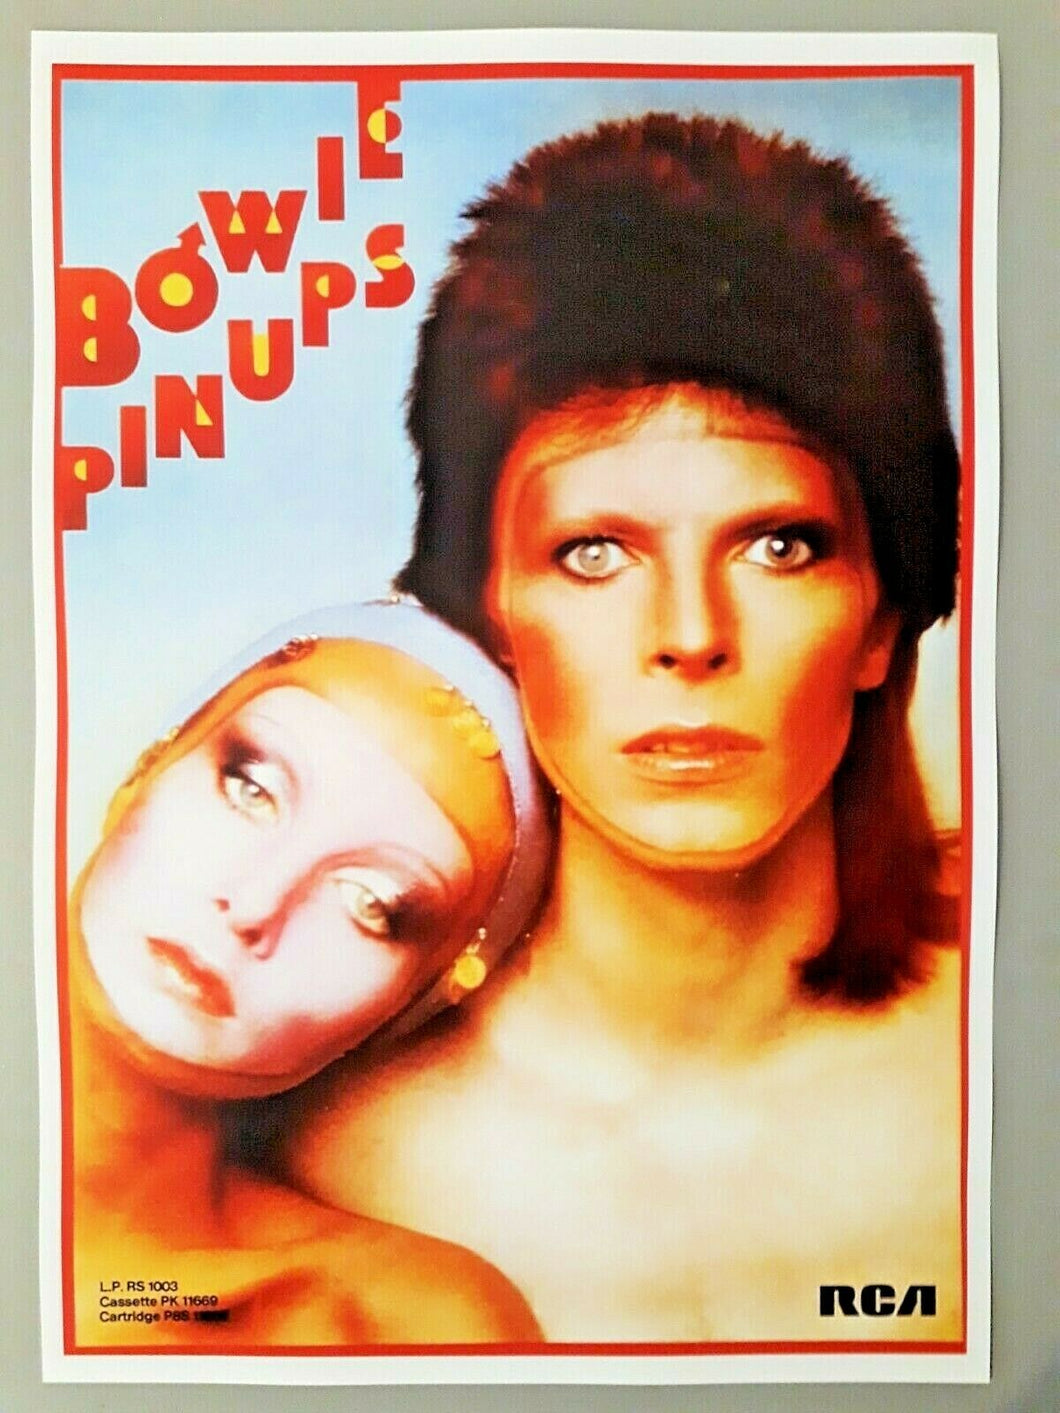 David Bowie poster - Pin Ups Album promotional release 1973 A3 size reprint - Original Music and Movie Posters for sale from Bamalama - Online Poster Store UK London